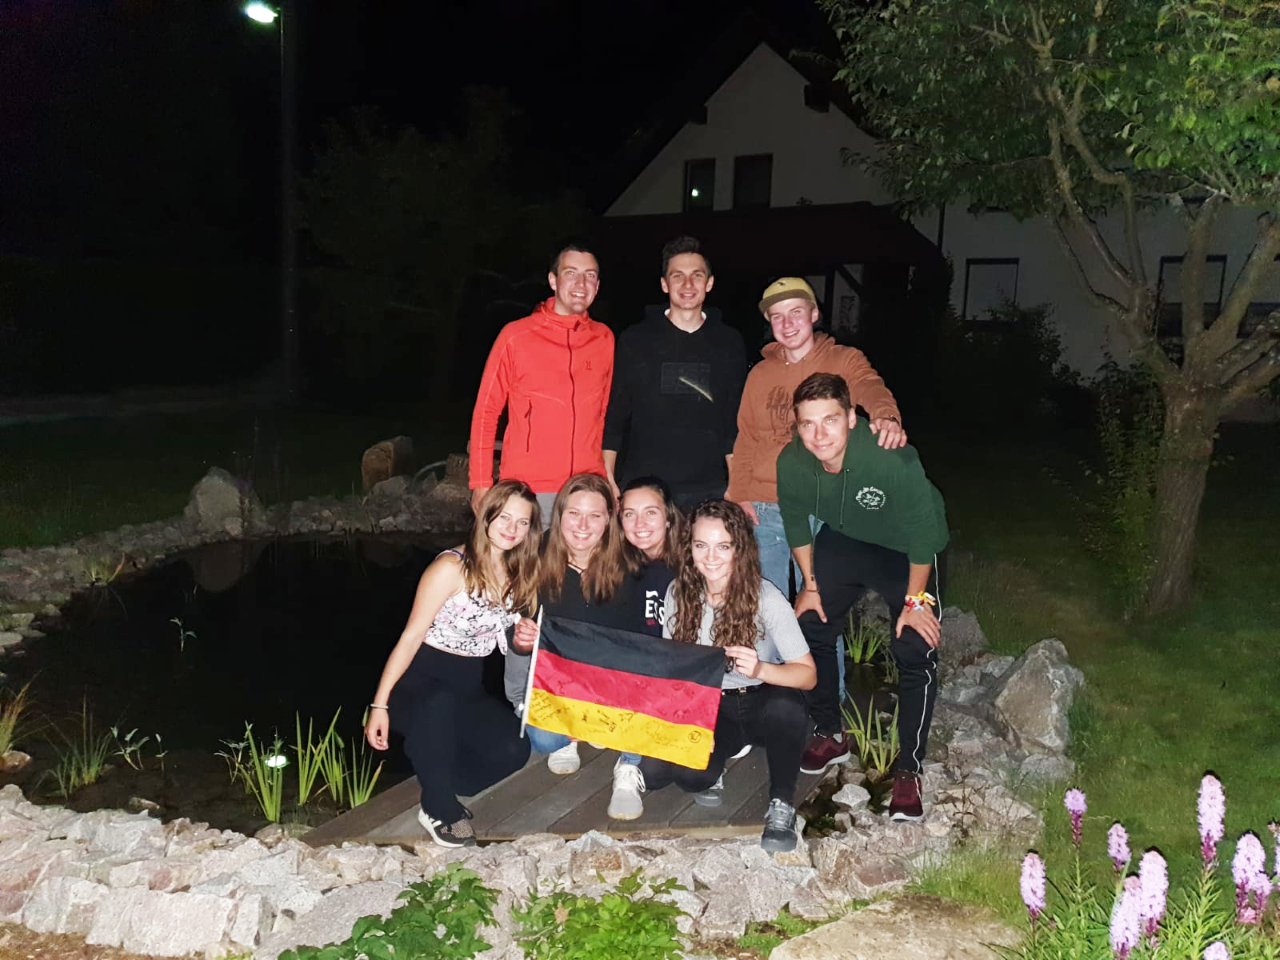 Mission completed – Next stop: Germany